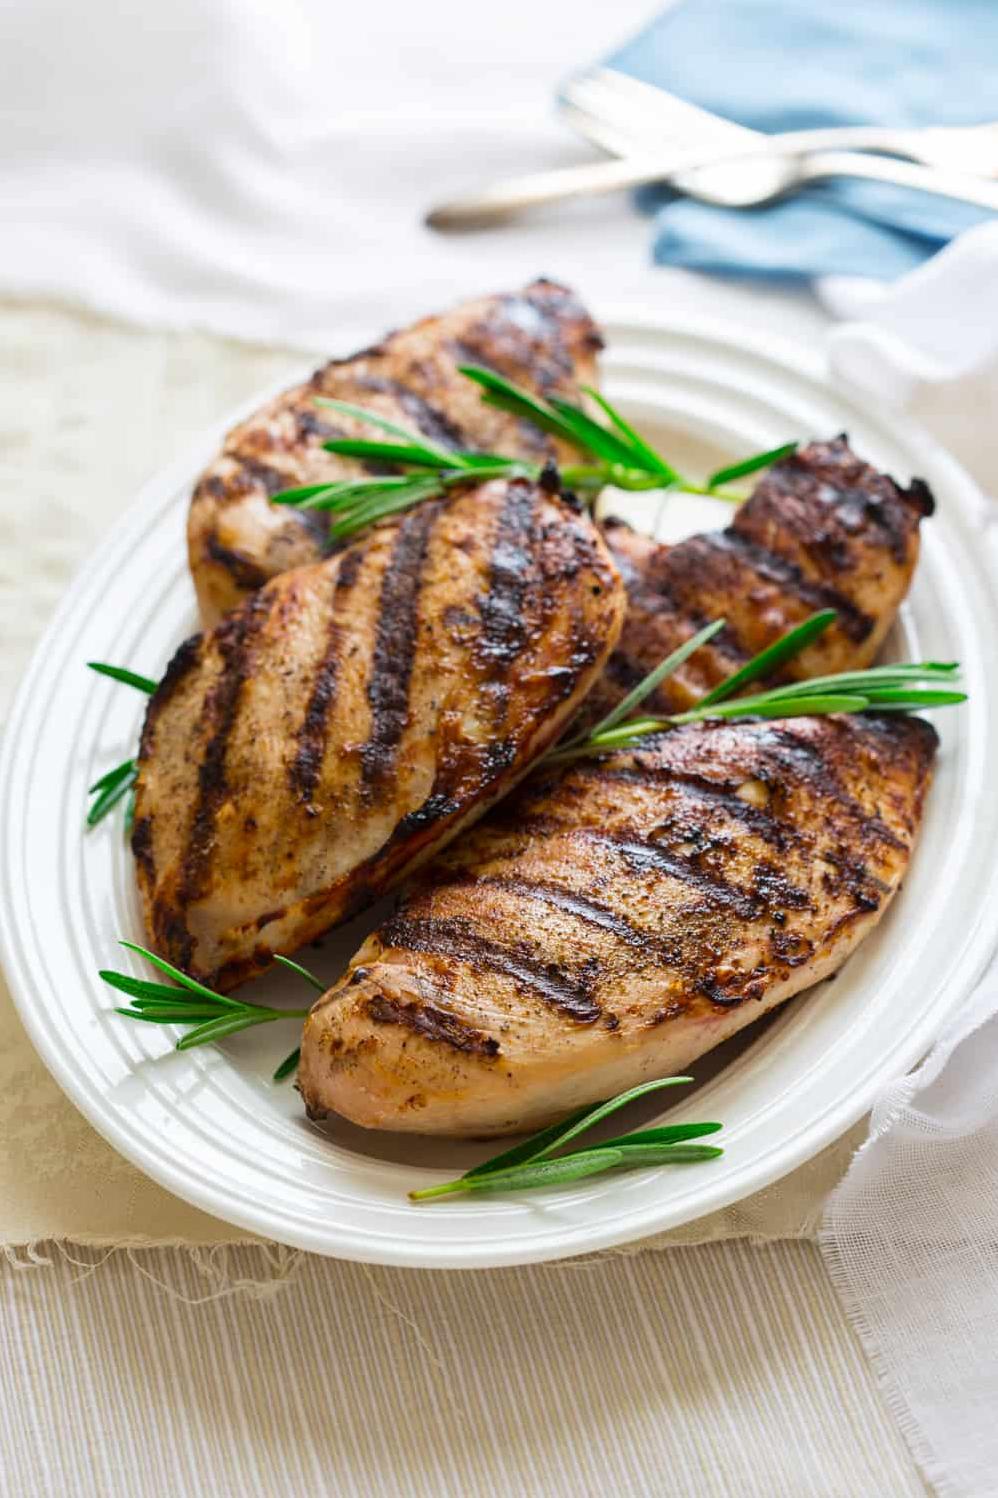  The perfect juicy and flavorful grilled chicken